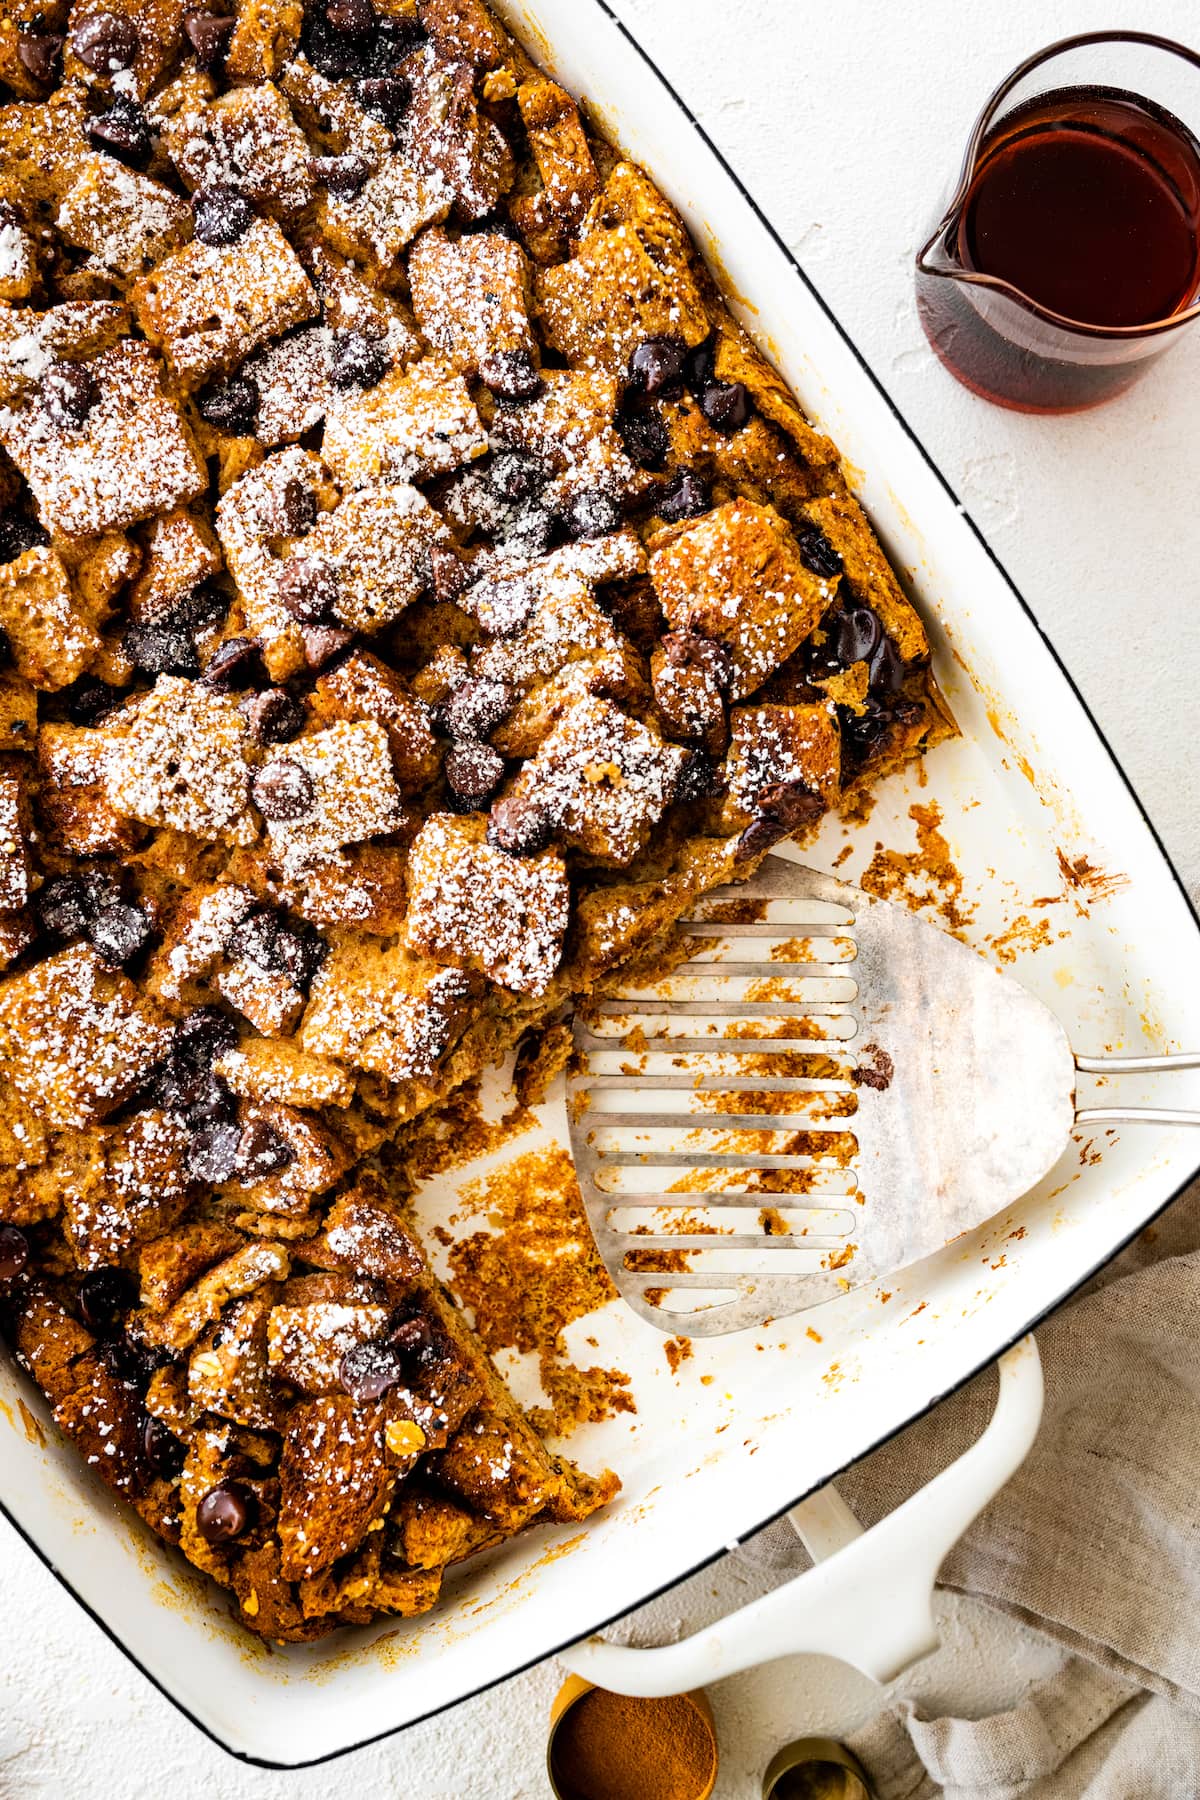 Pumpkin French Toast Casserole in a square baking dish topped with powdered sugar and chocolate chips. Two pieces are missing from the dish where a metal spatula is instead.